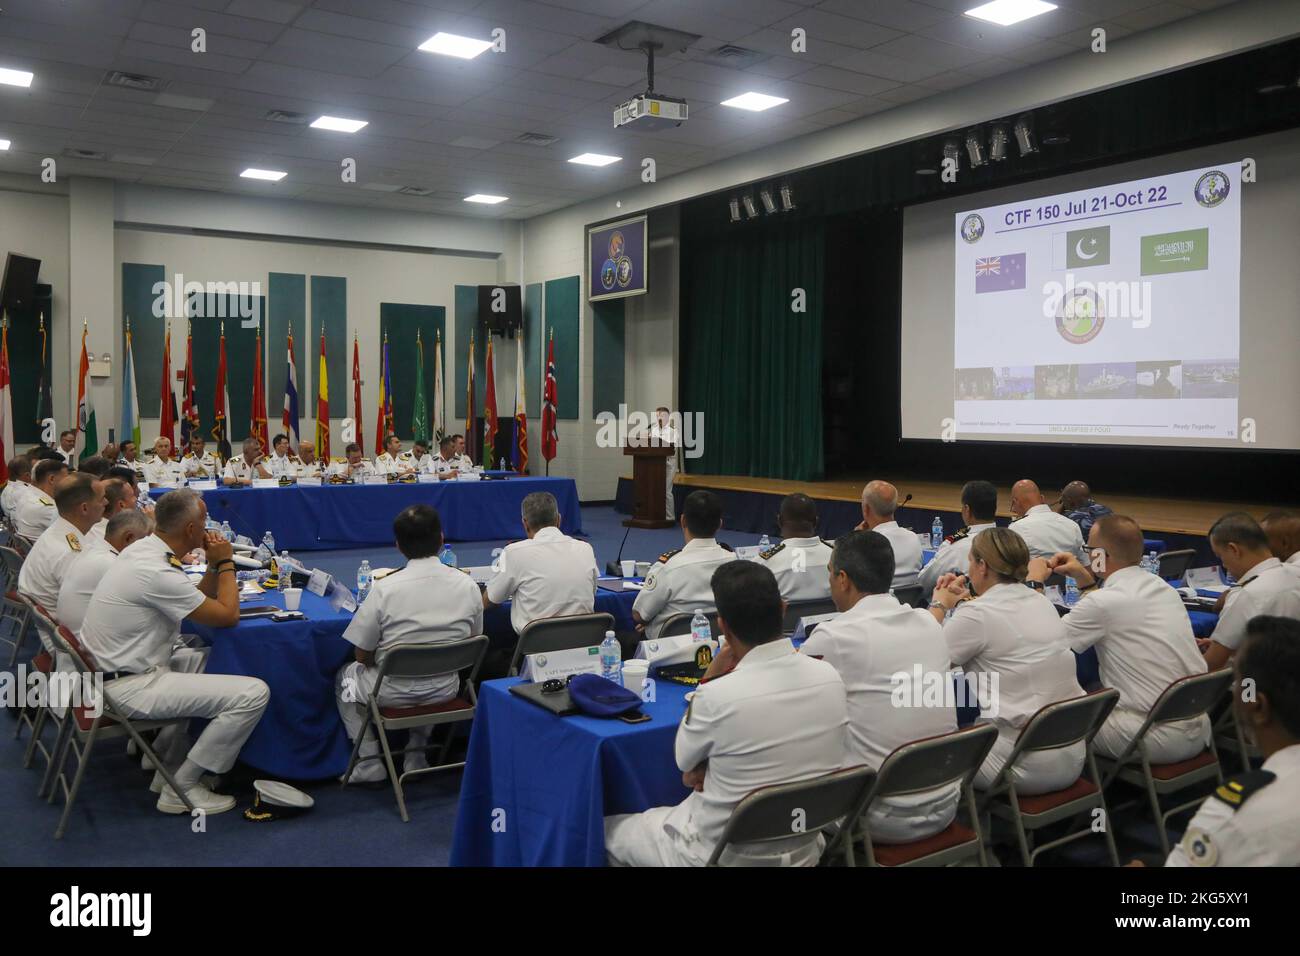 Combined Maritime Forces (CMF) – A 39-nation naval partnership